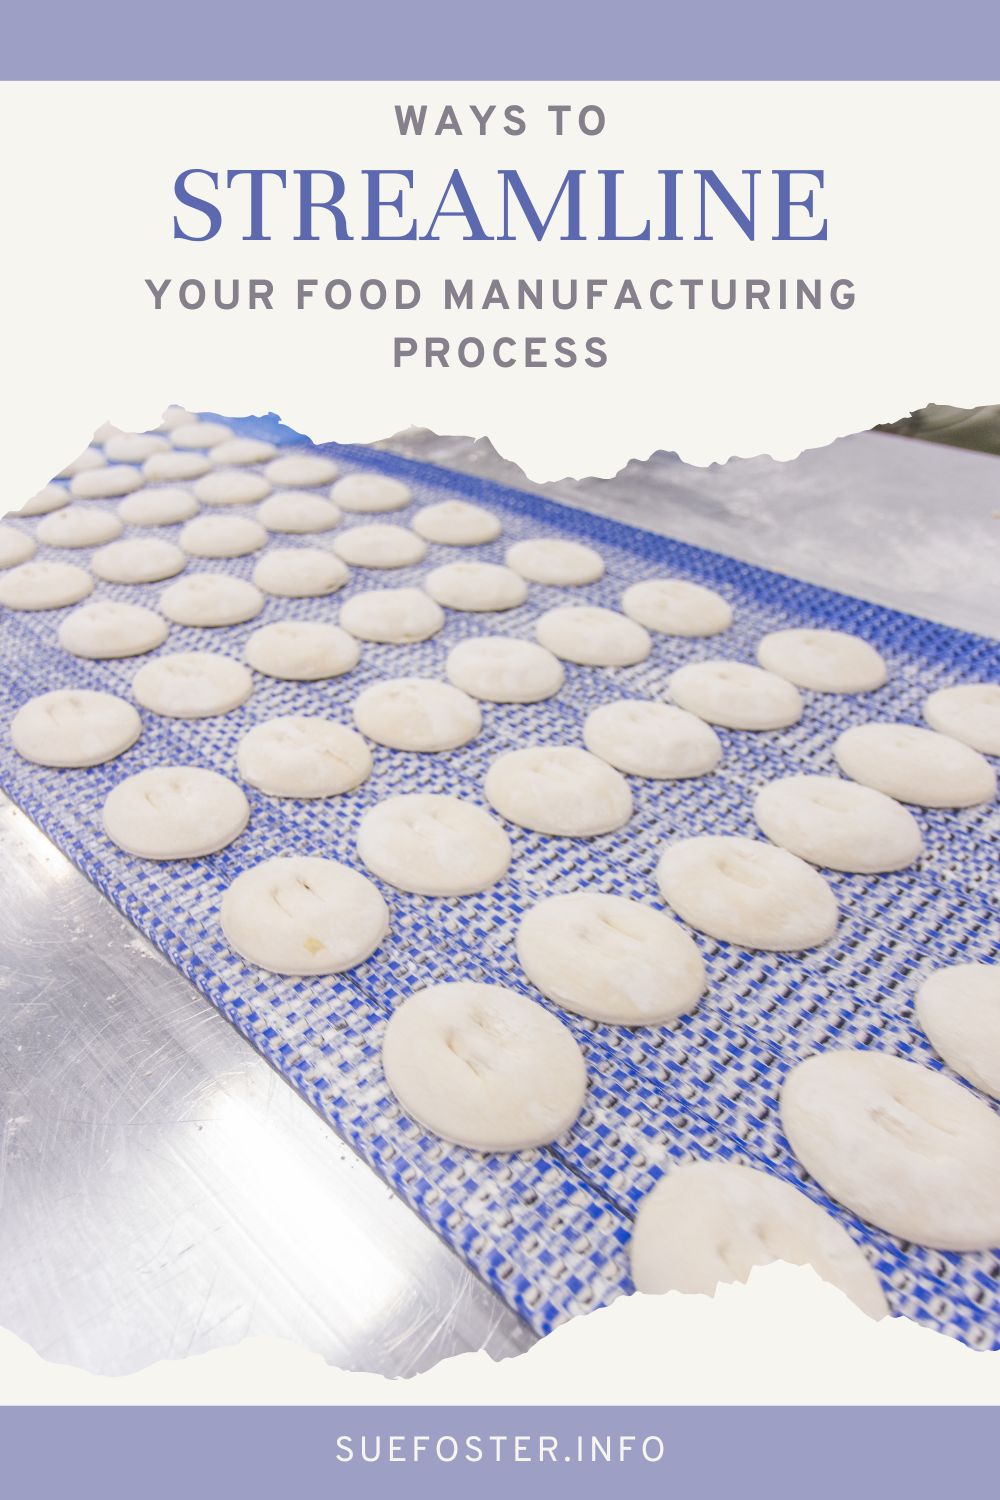 Food manufacturing can be quite a tricky business to handle. Utilize these technologies to make your processes easier.